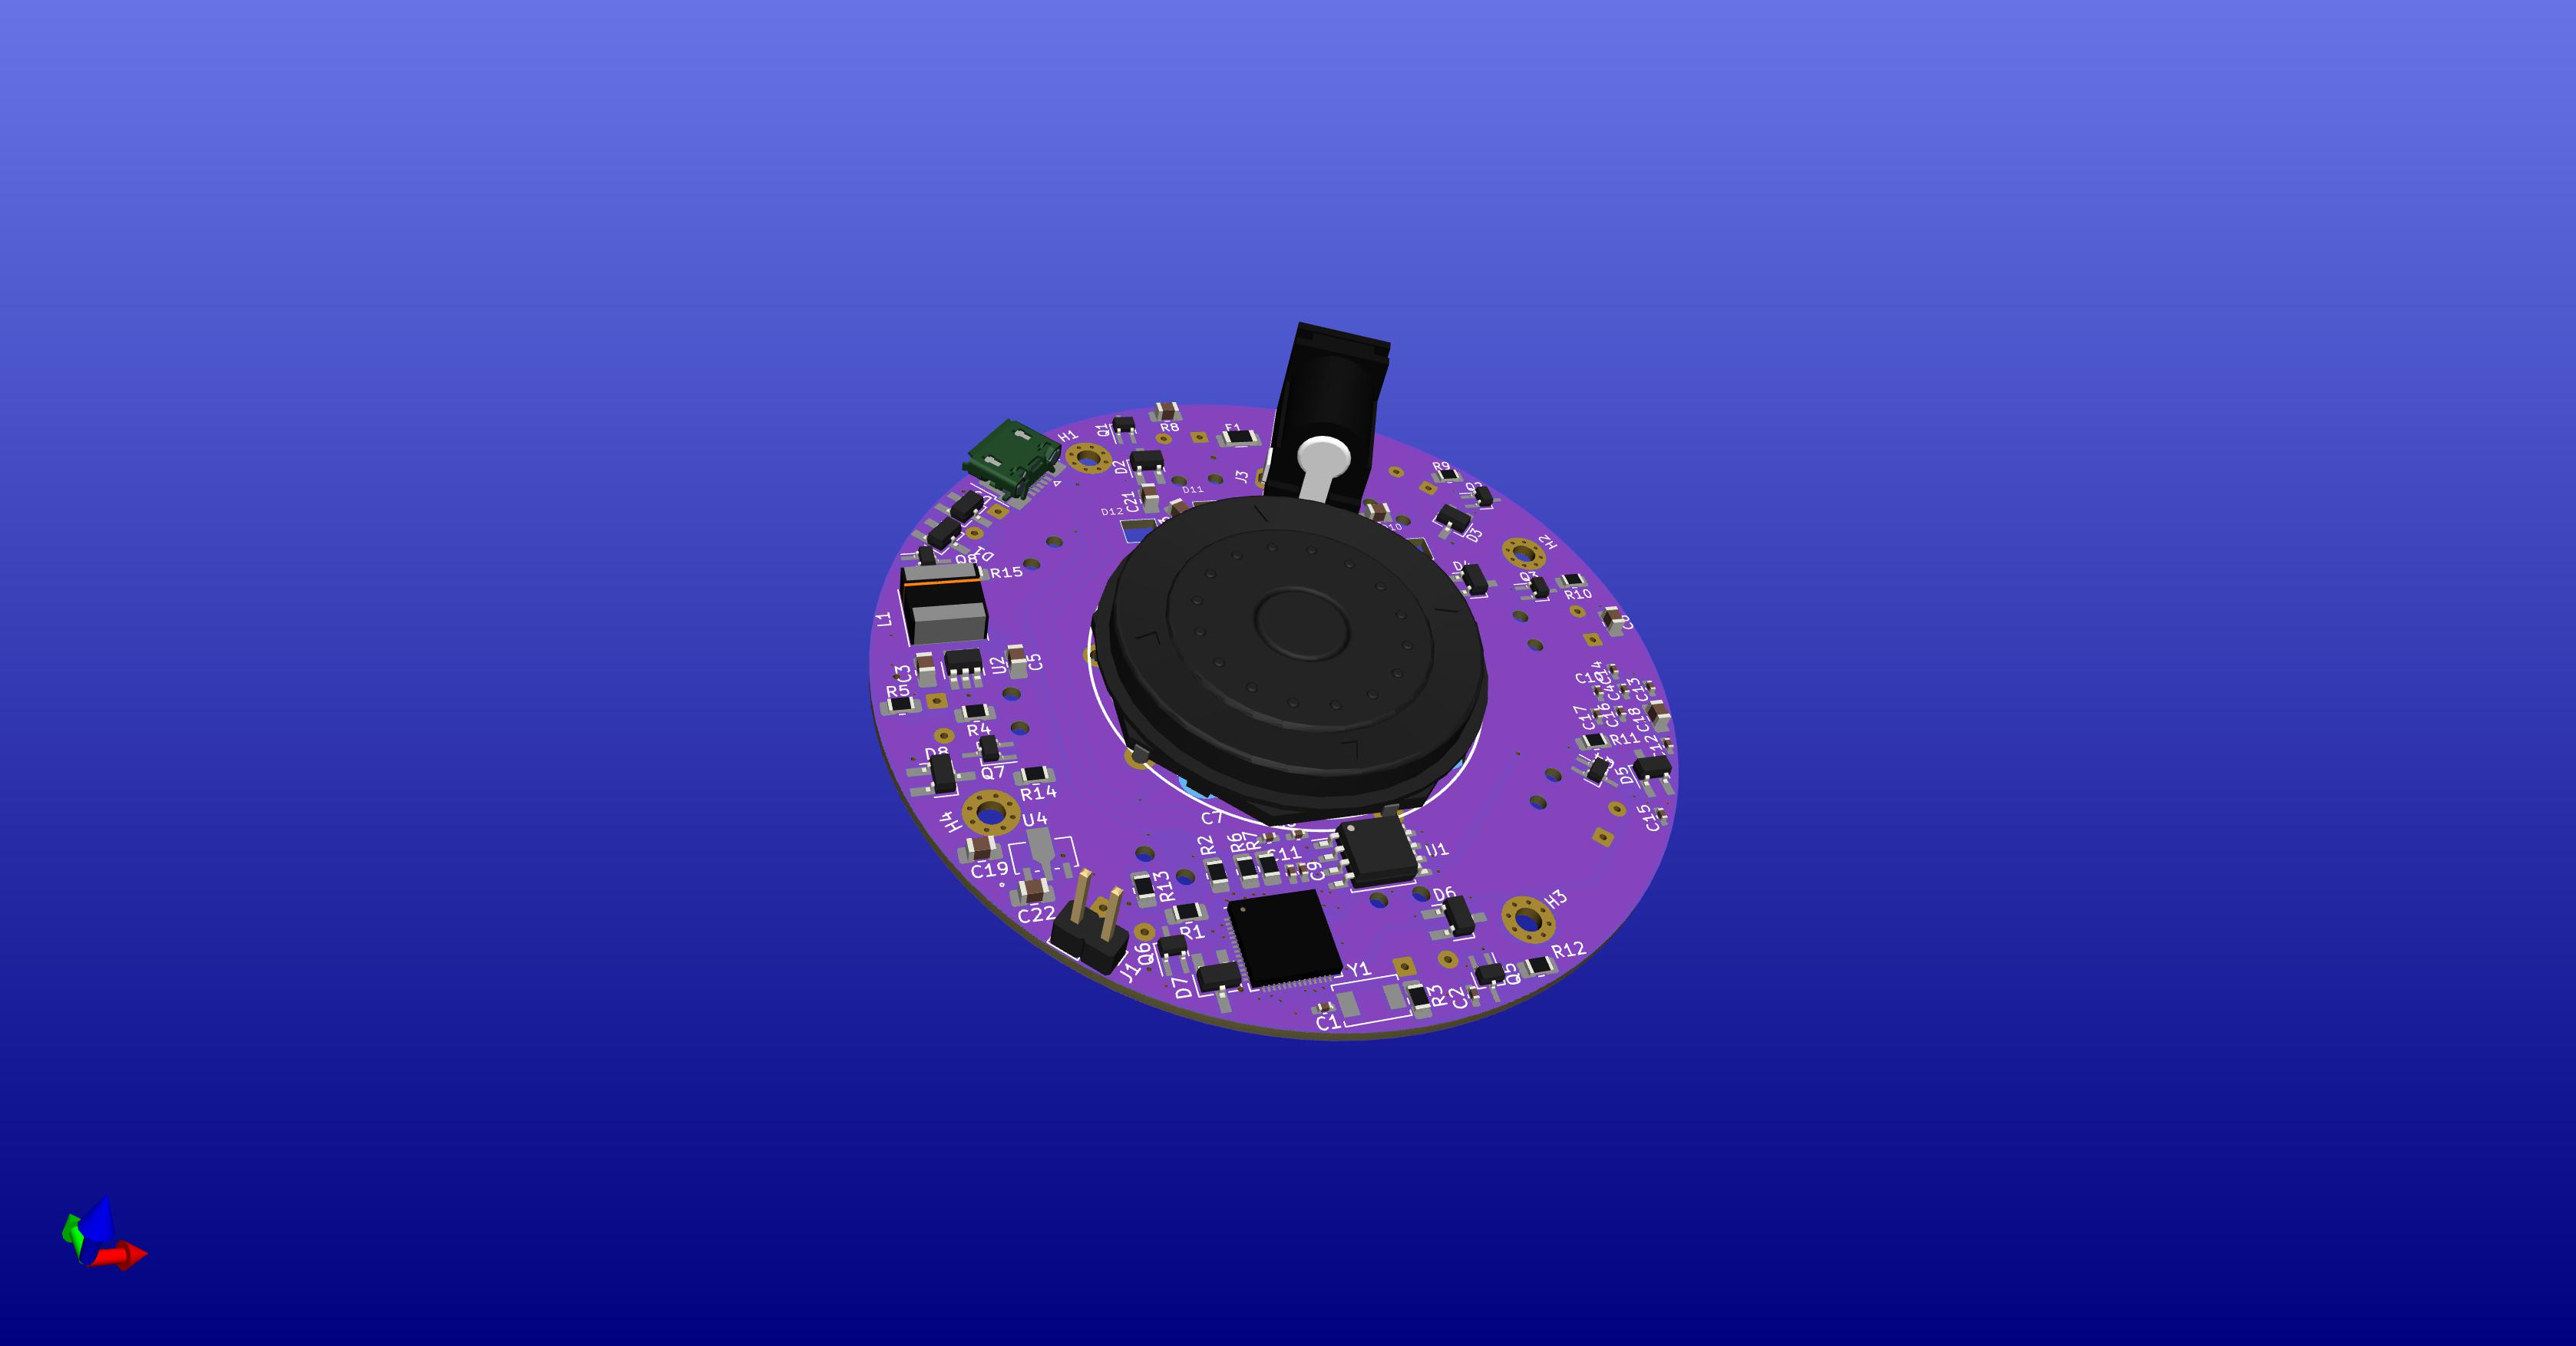 3D render of the front of the E-Fidget printed circuit board